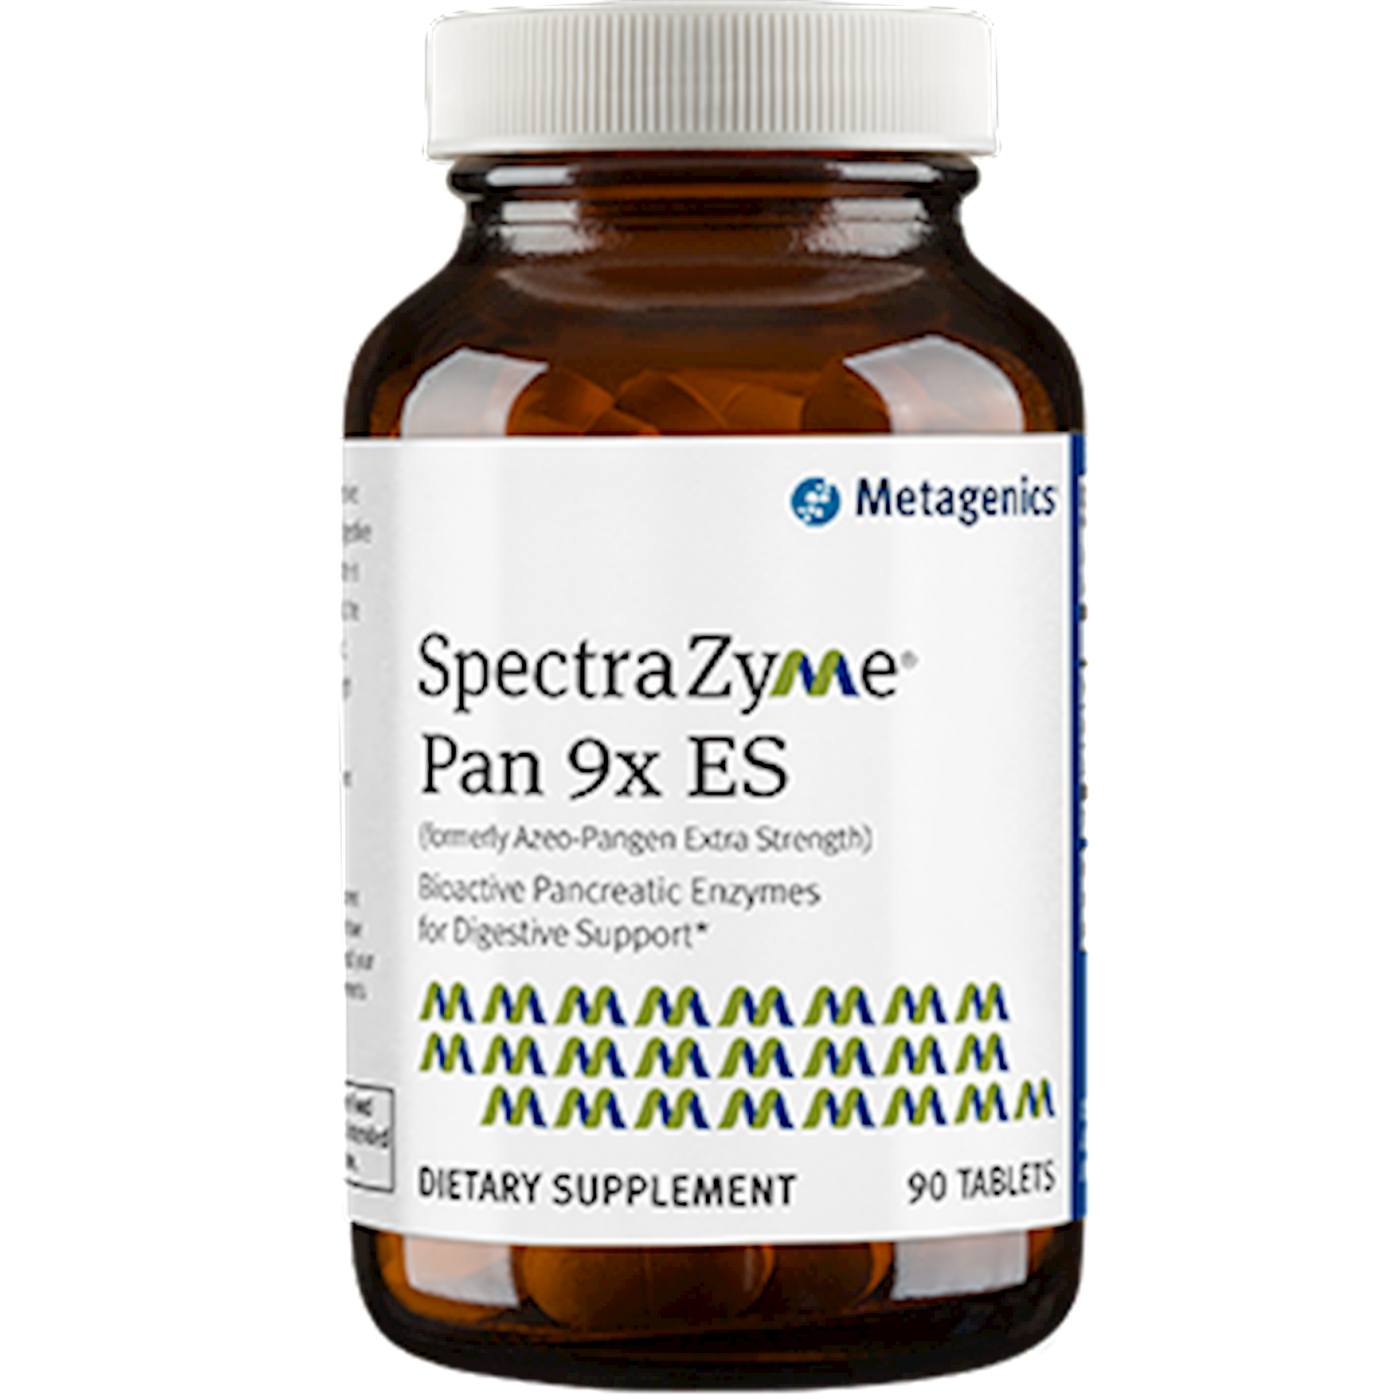 SpectraZyme Pan 9x ES  Curated Wellness